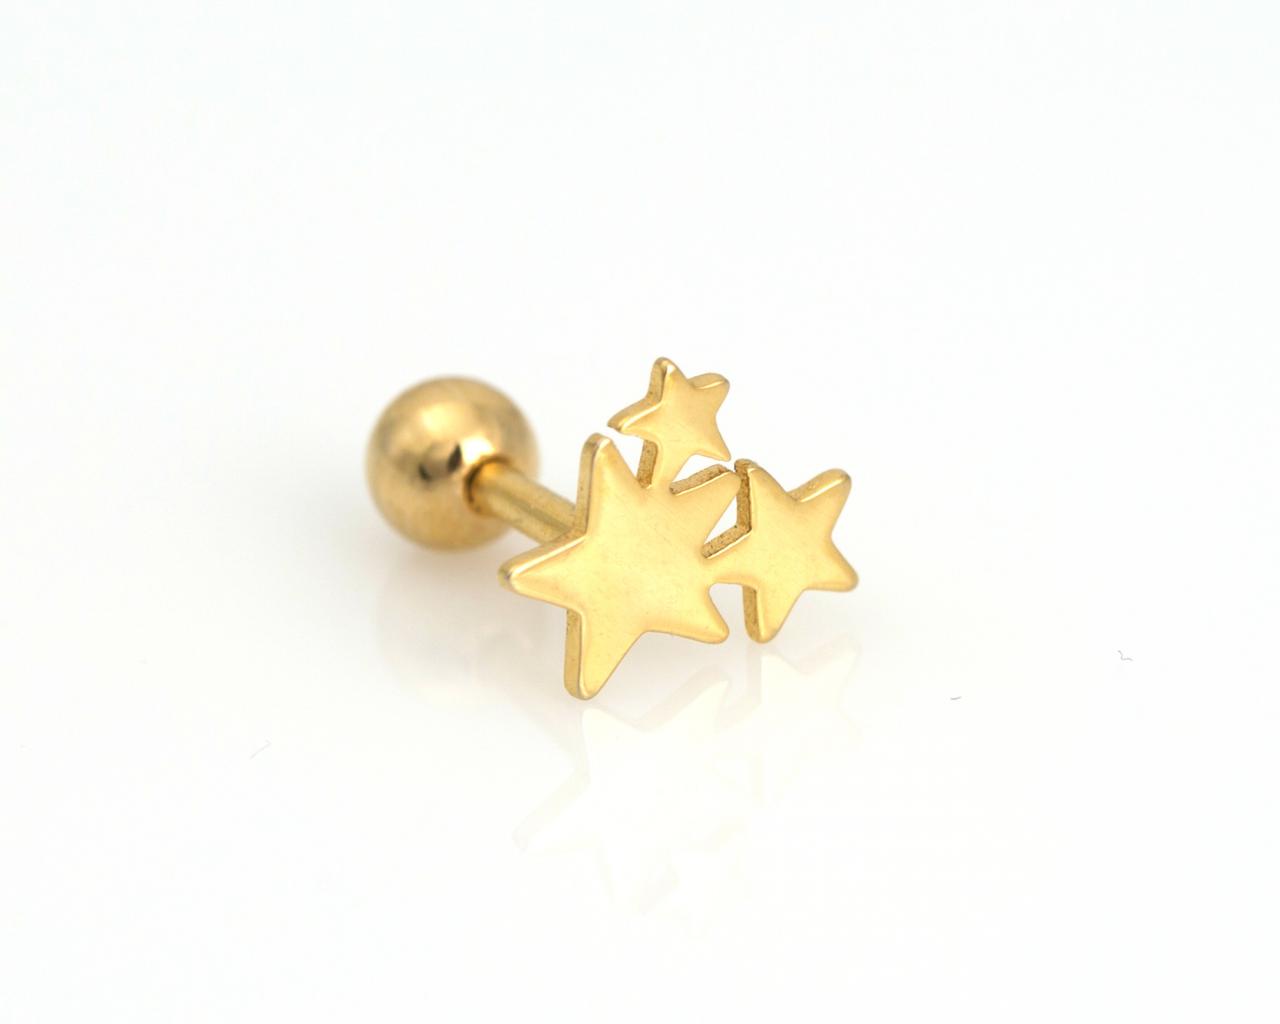 Stars Peircing For Tragus Helix Lobe Use Gold Plated Over Brass 5nbap16